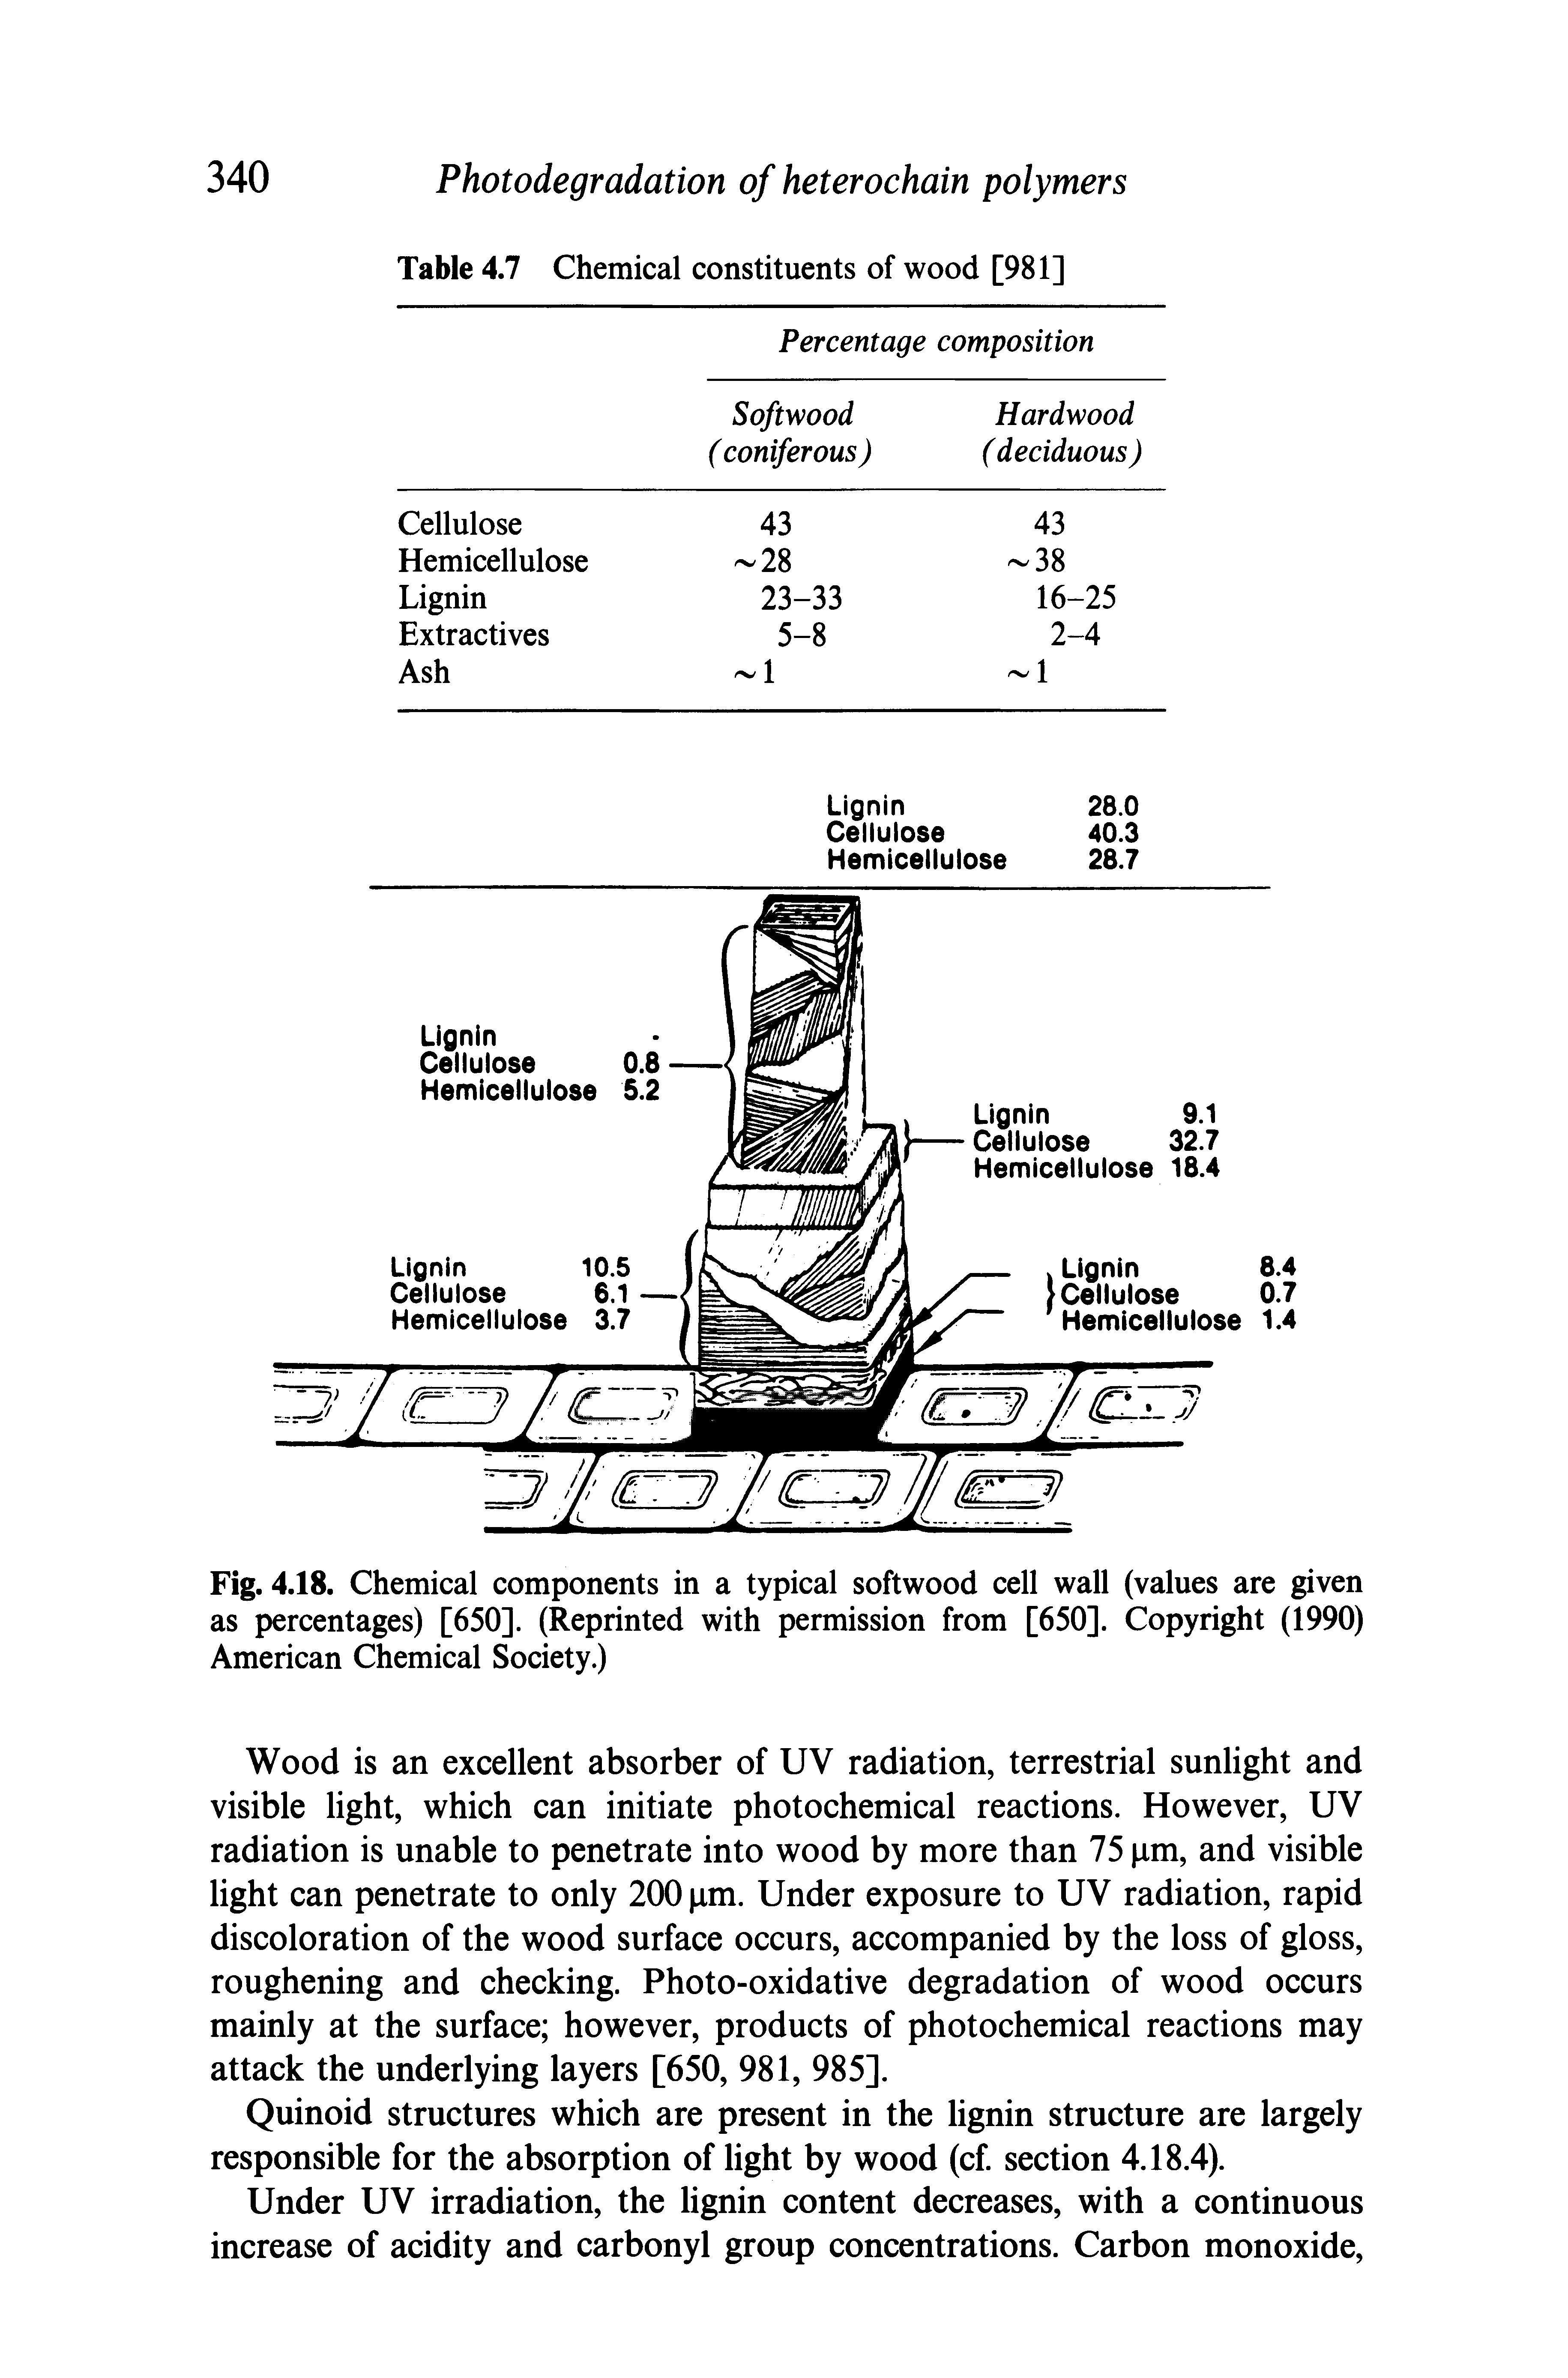 Fig. 4.18. Chemical components in a typical softwood cell wall (values are given as percentages) [650]. (Reprinted with permission from [650]. Copyright (1990) American Chemical Society.)...